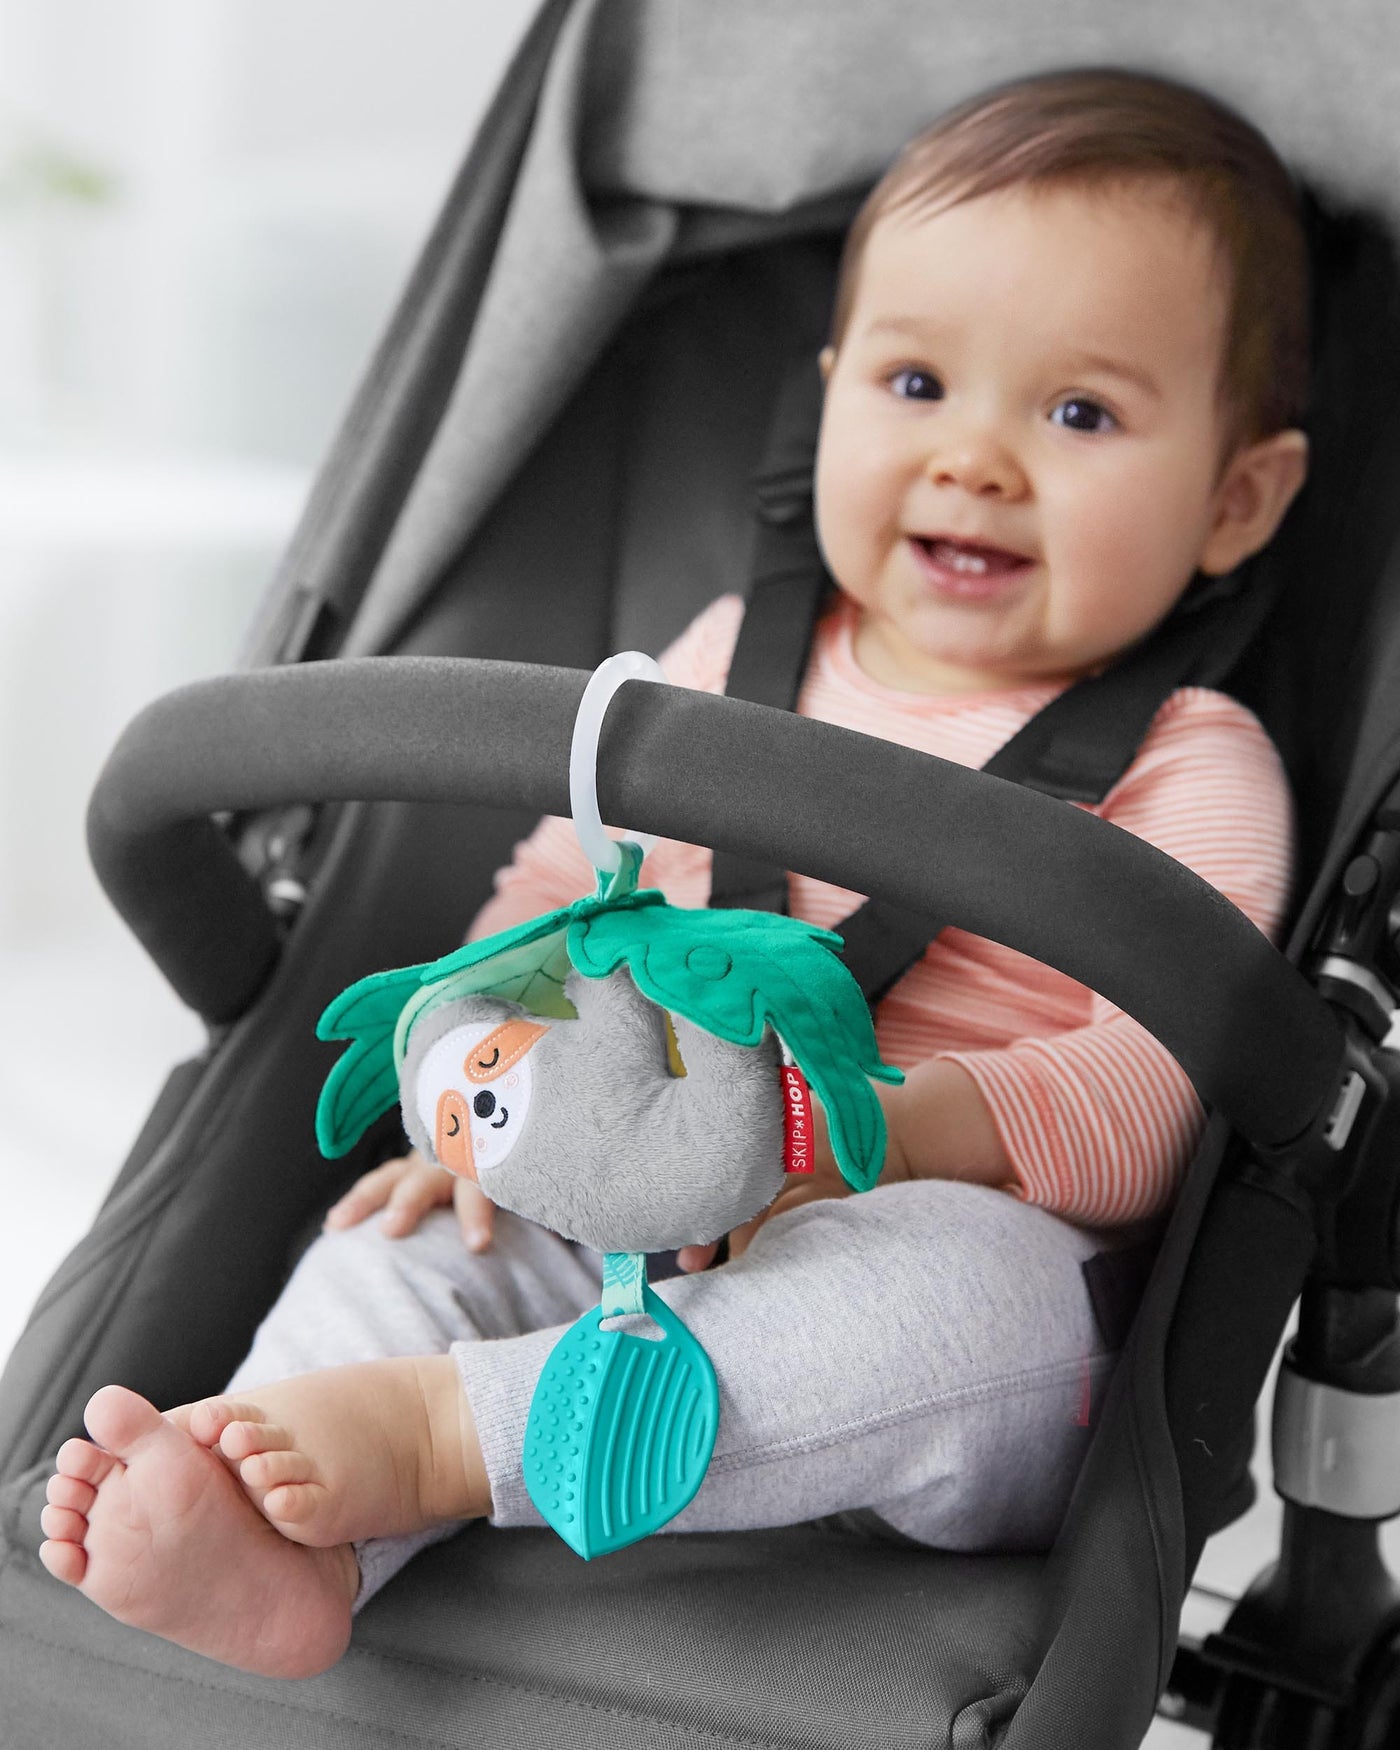 Tropical Paradise Jitter Stroller Toy - Sloth | Skip Hop by Skip Hop, USA Baby Care